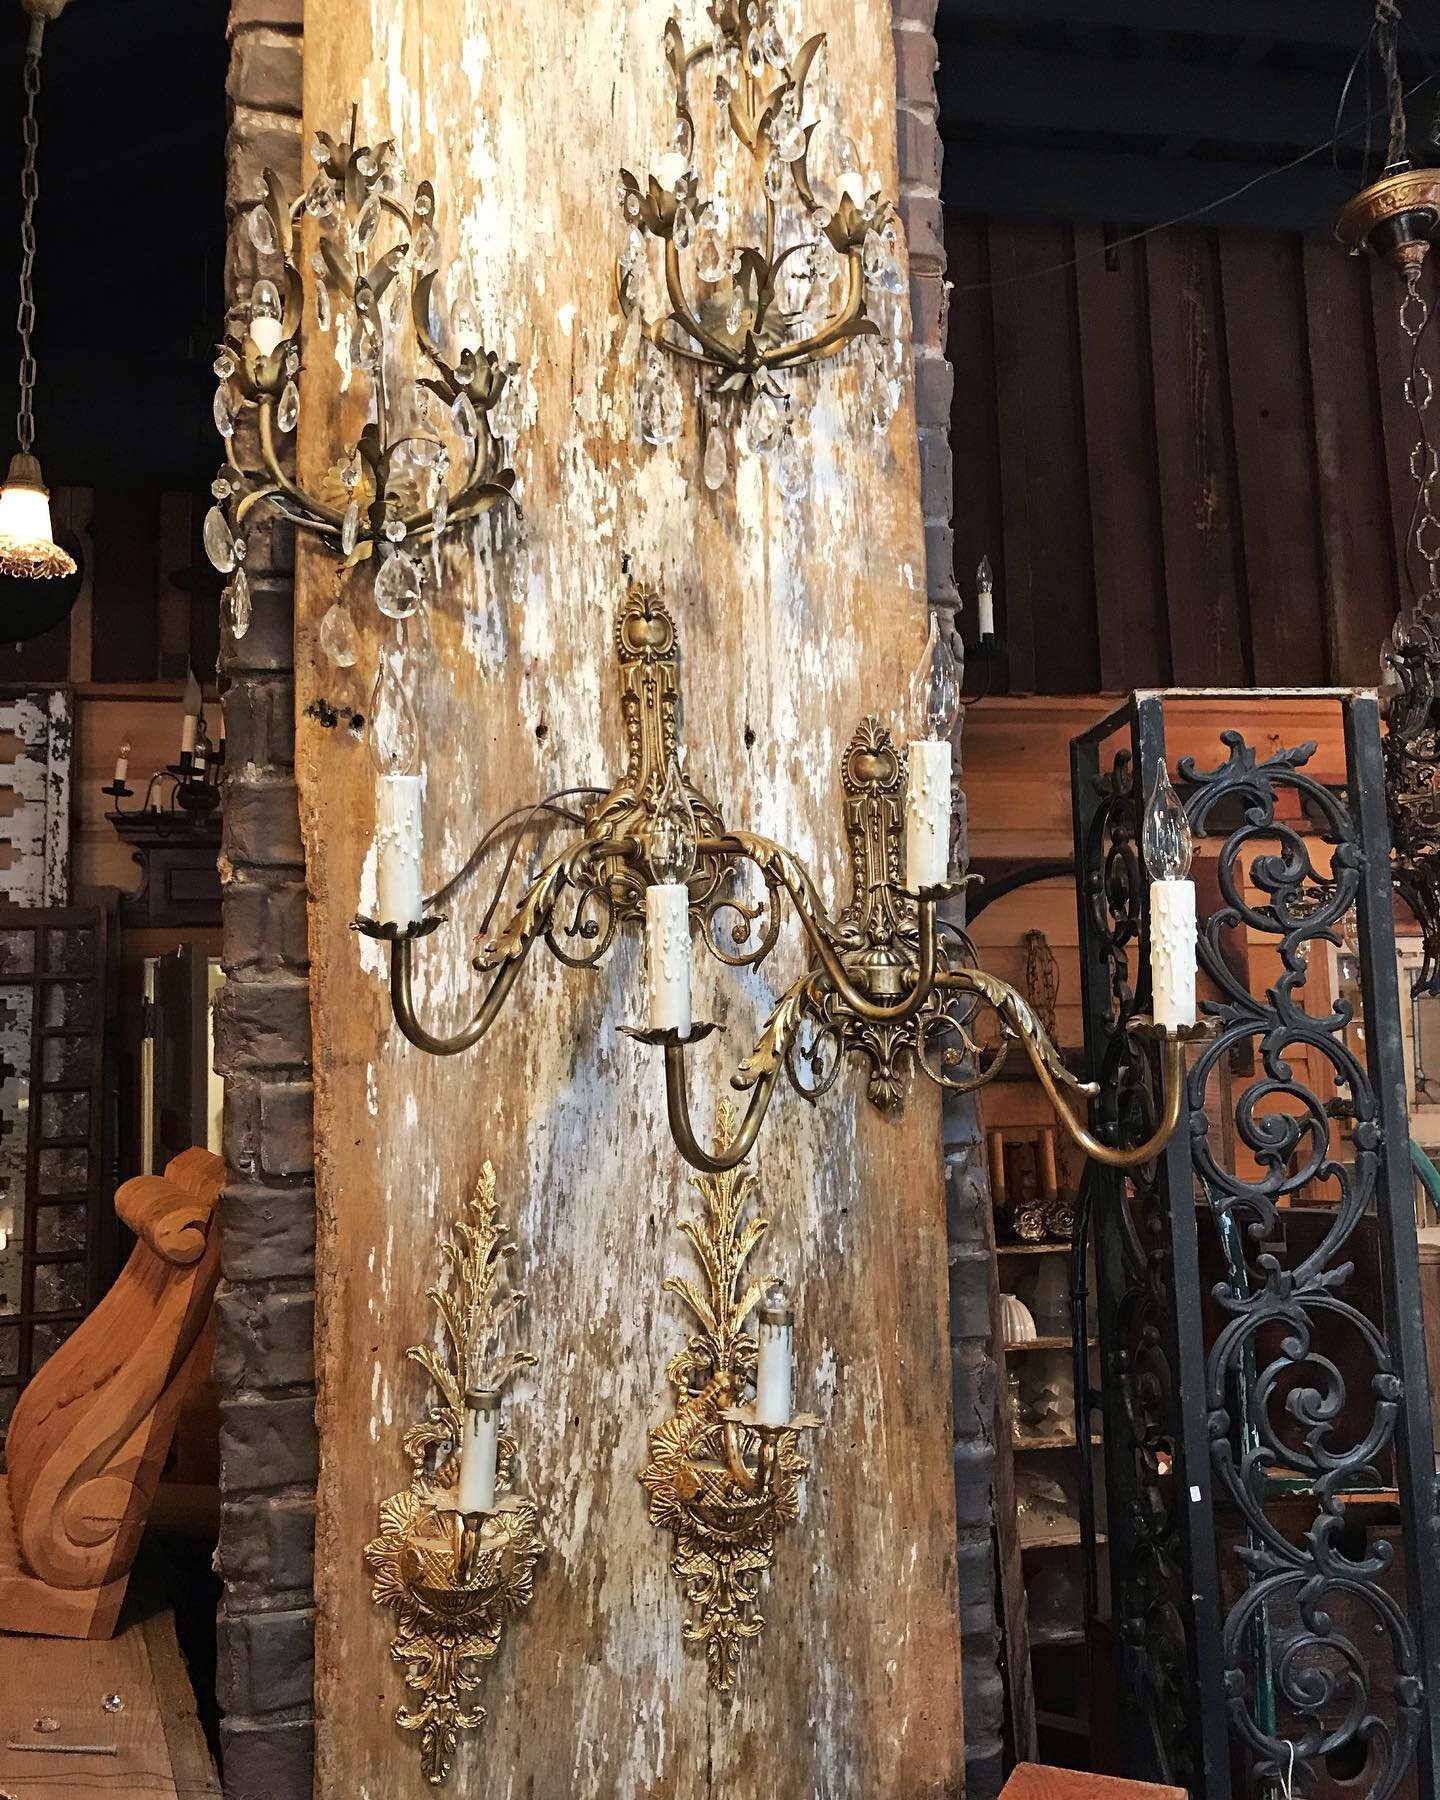 Some beautiful wall sconces!